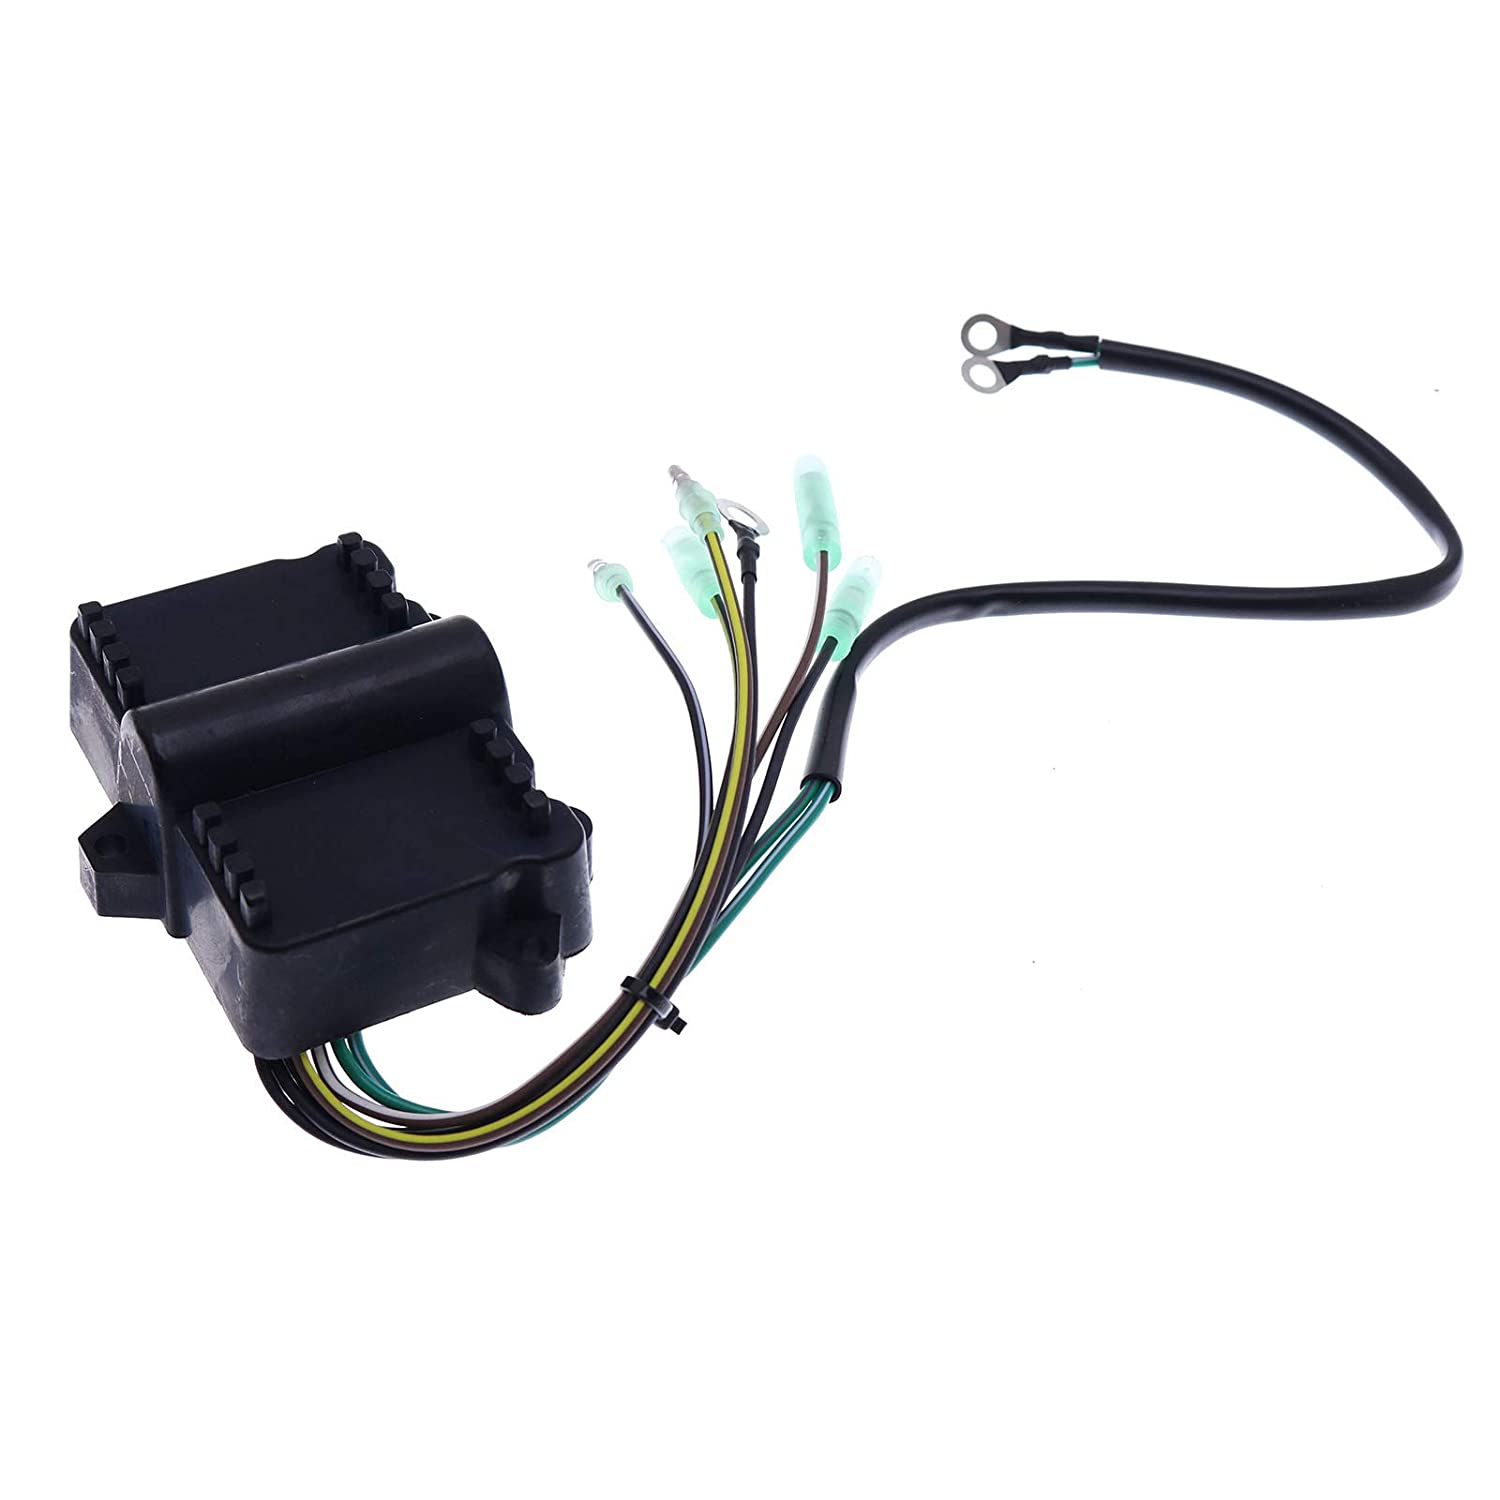 Switch Box CDI Power Pack Compatible with Mercury Mariner 114-7452K1 339-7452A15 339-7452A19 18-5777 - KUDUPARTS